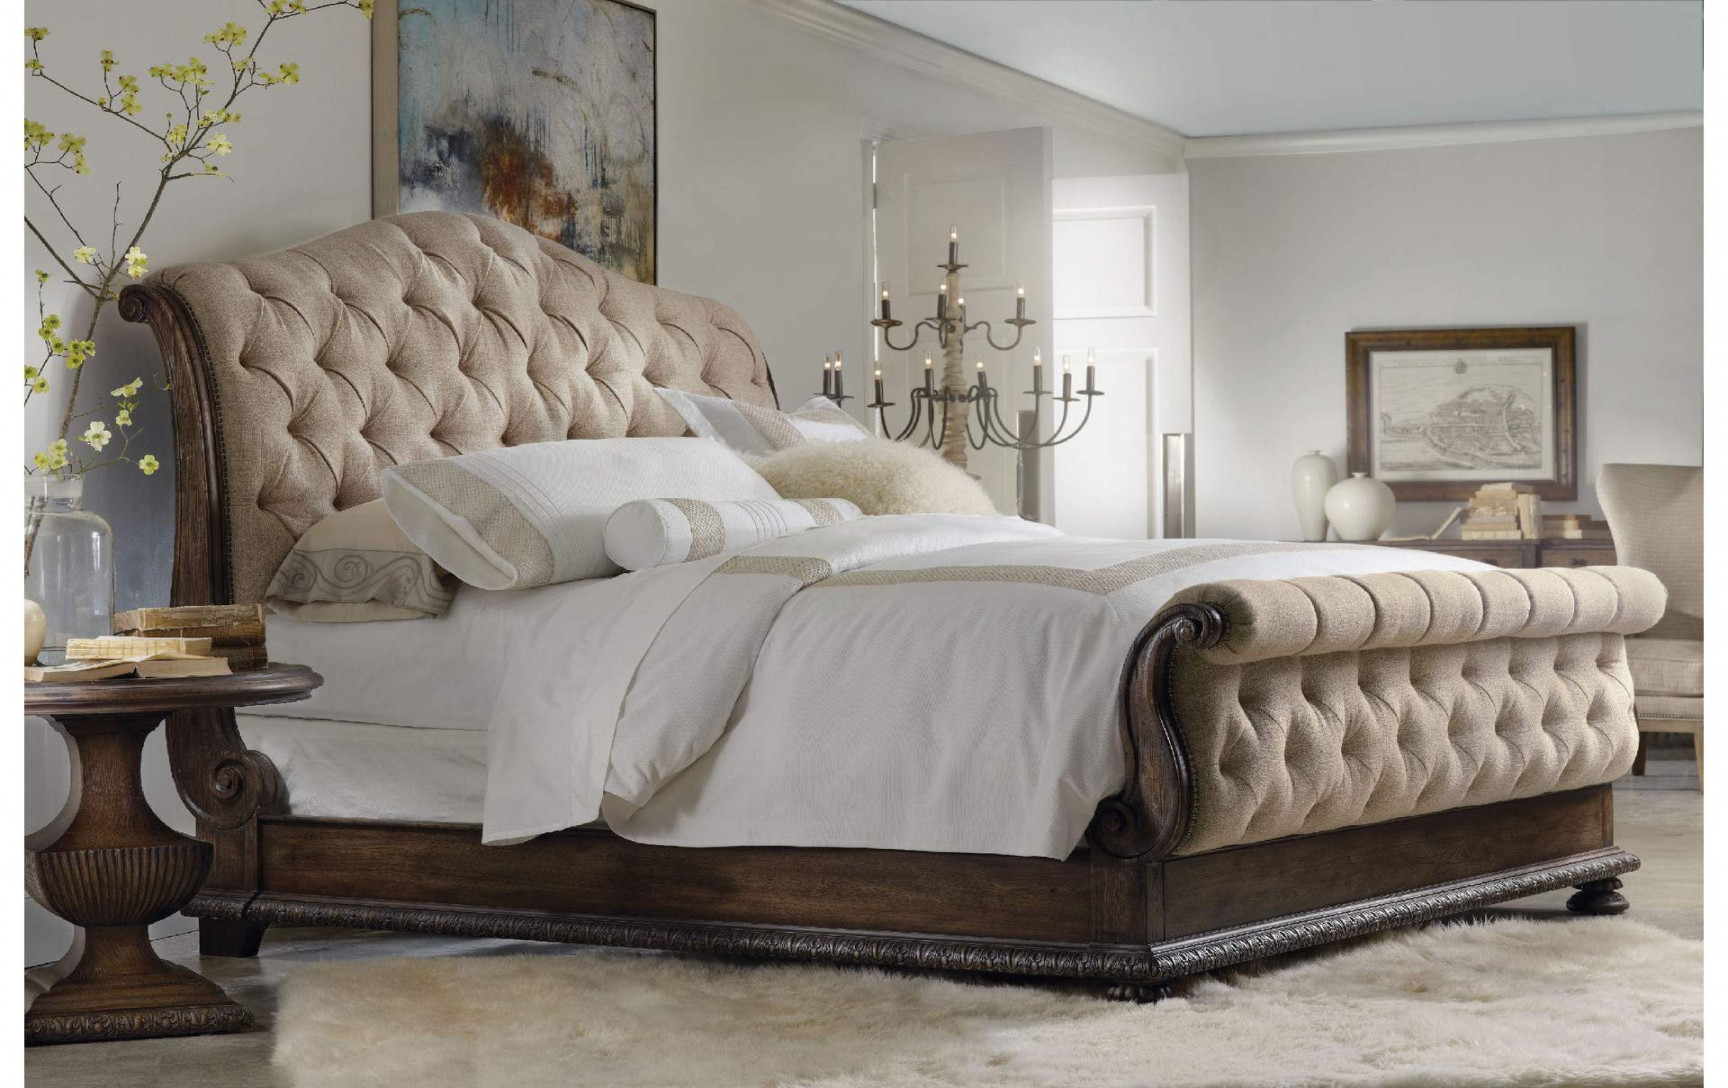 Rhapsody King Tufted Bed Ivan Smith Furniture